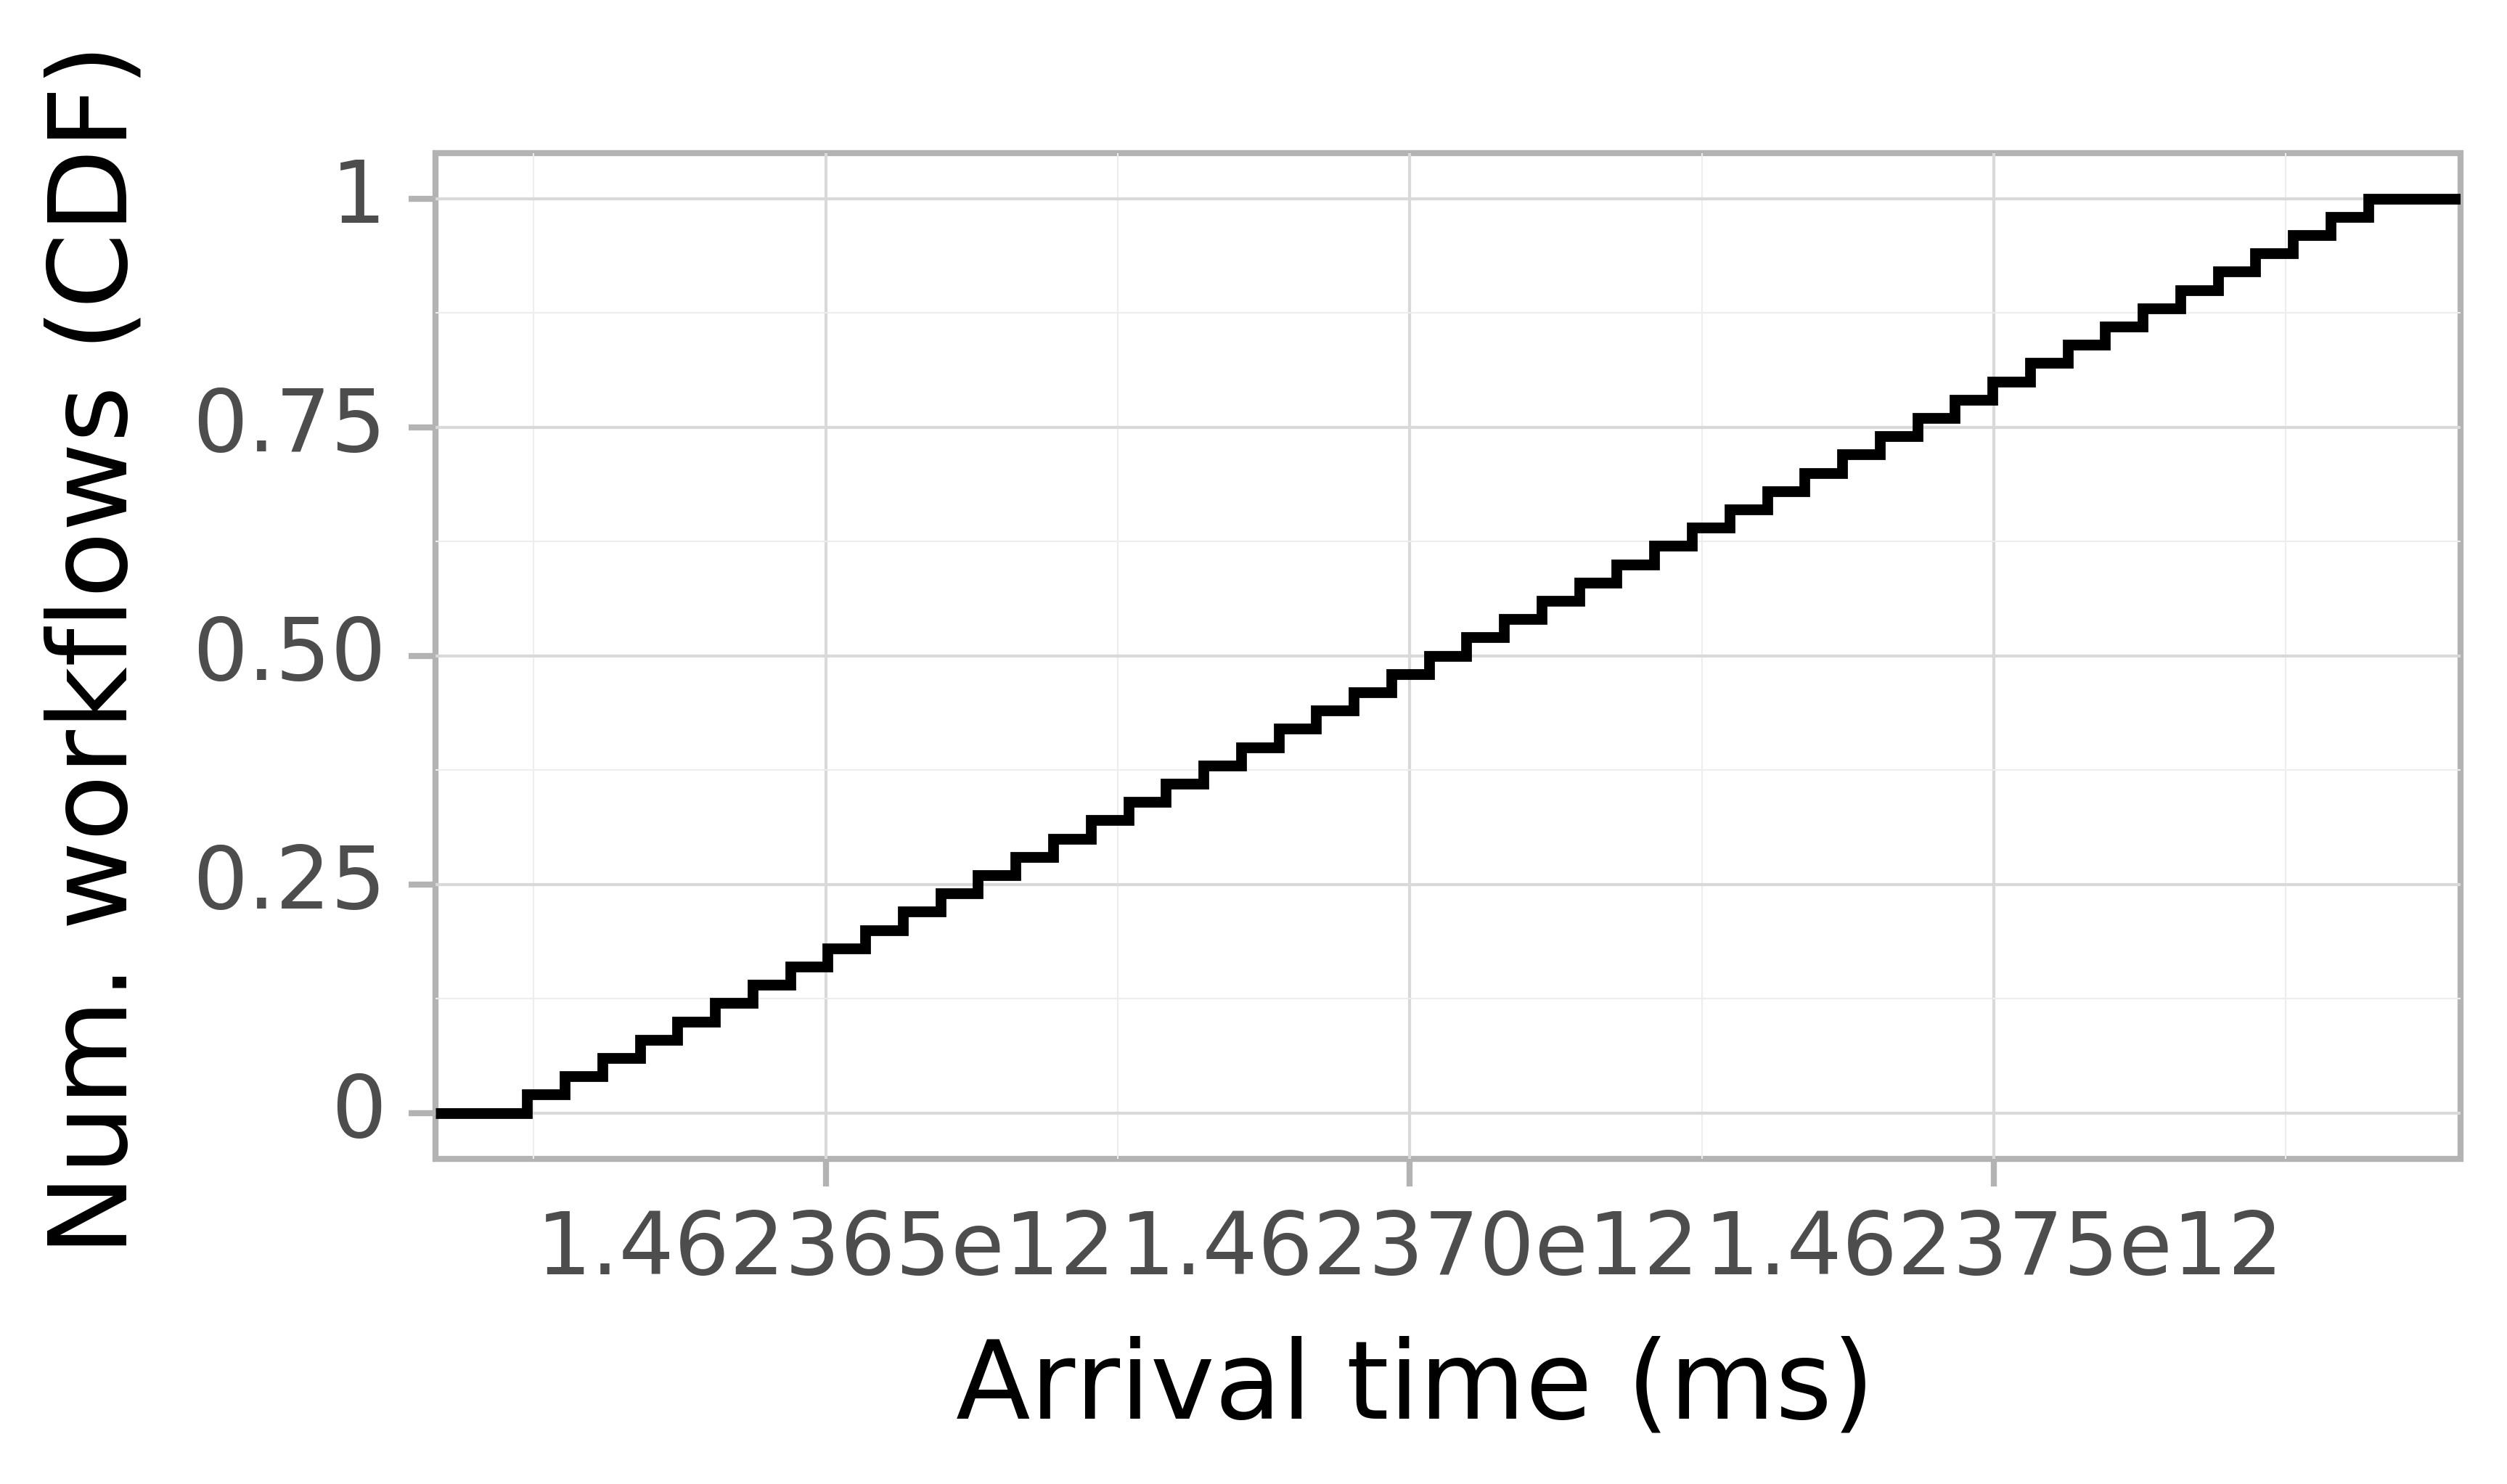 Job arrival CDF graph for the askalon-new_ee57 trace.